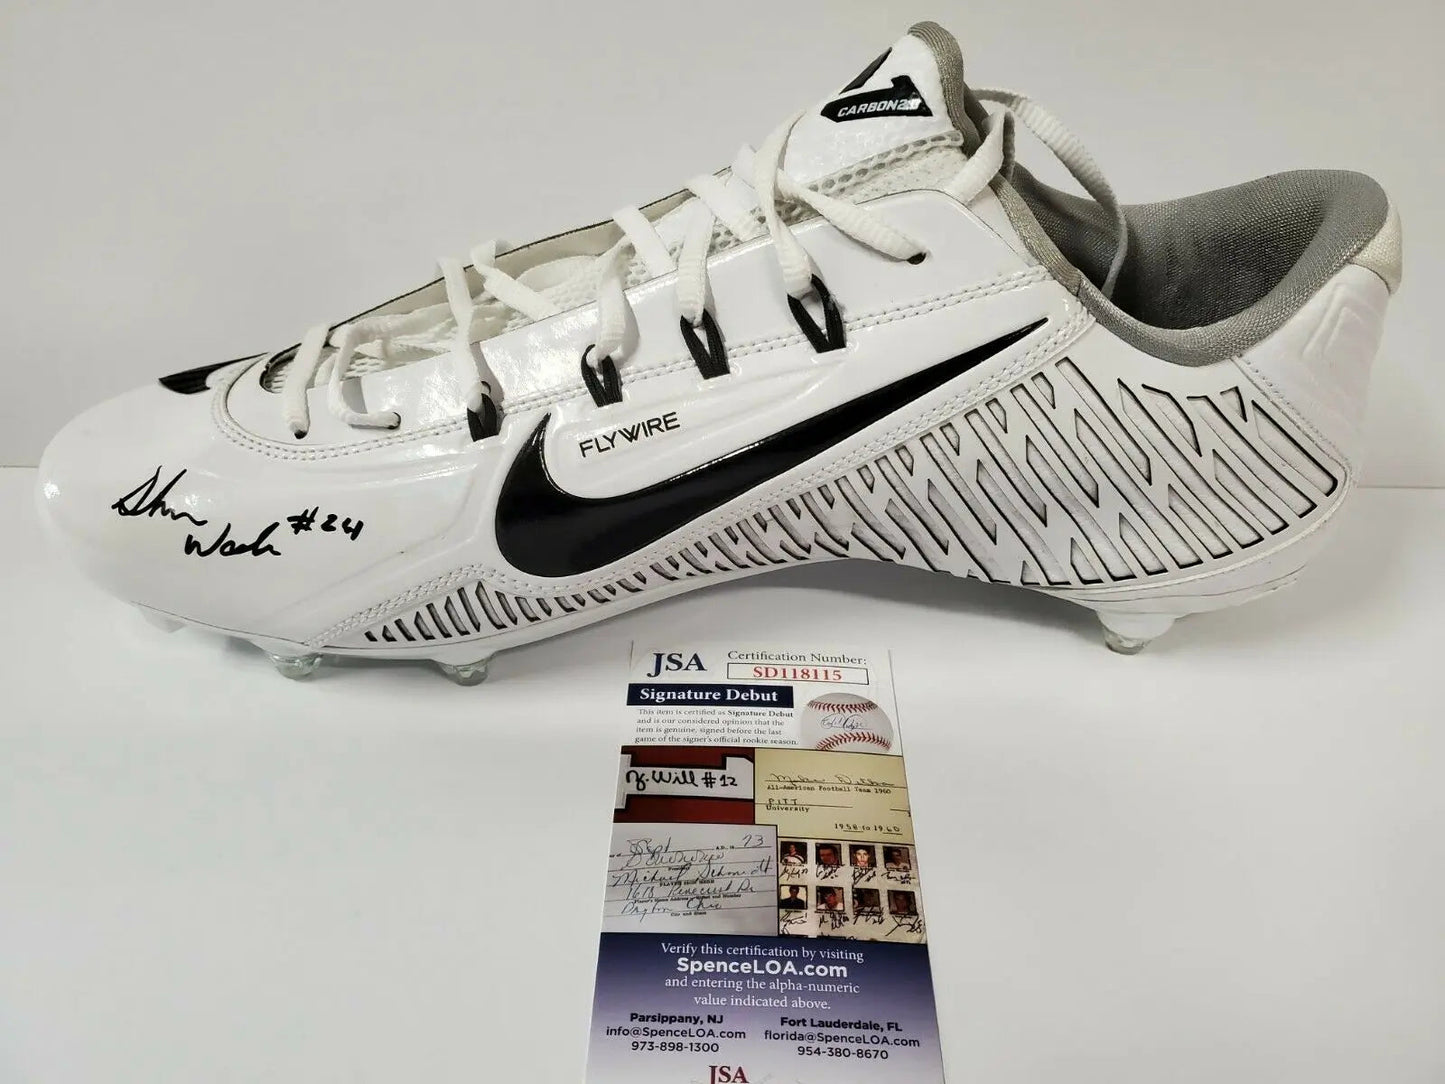 MVP Authentics Ohio State Buckeyes Shaun Wade Autographed Signed Nike Cleat Jsa Debut Coa 107.10 sports jersey framing , jersey framing